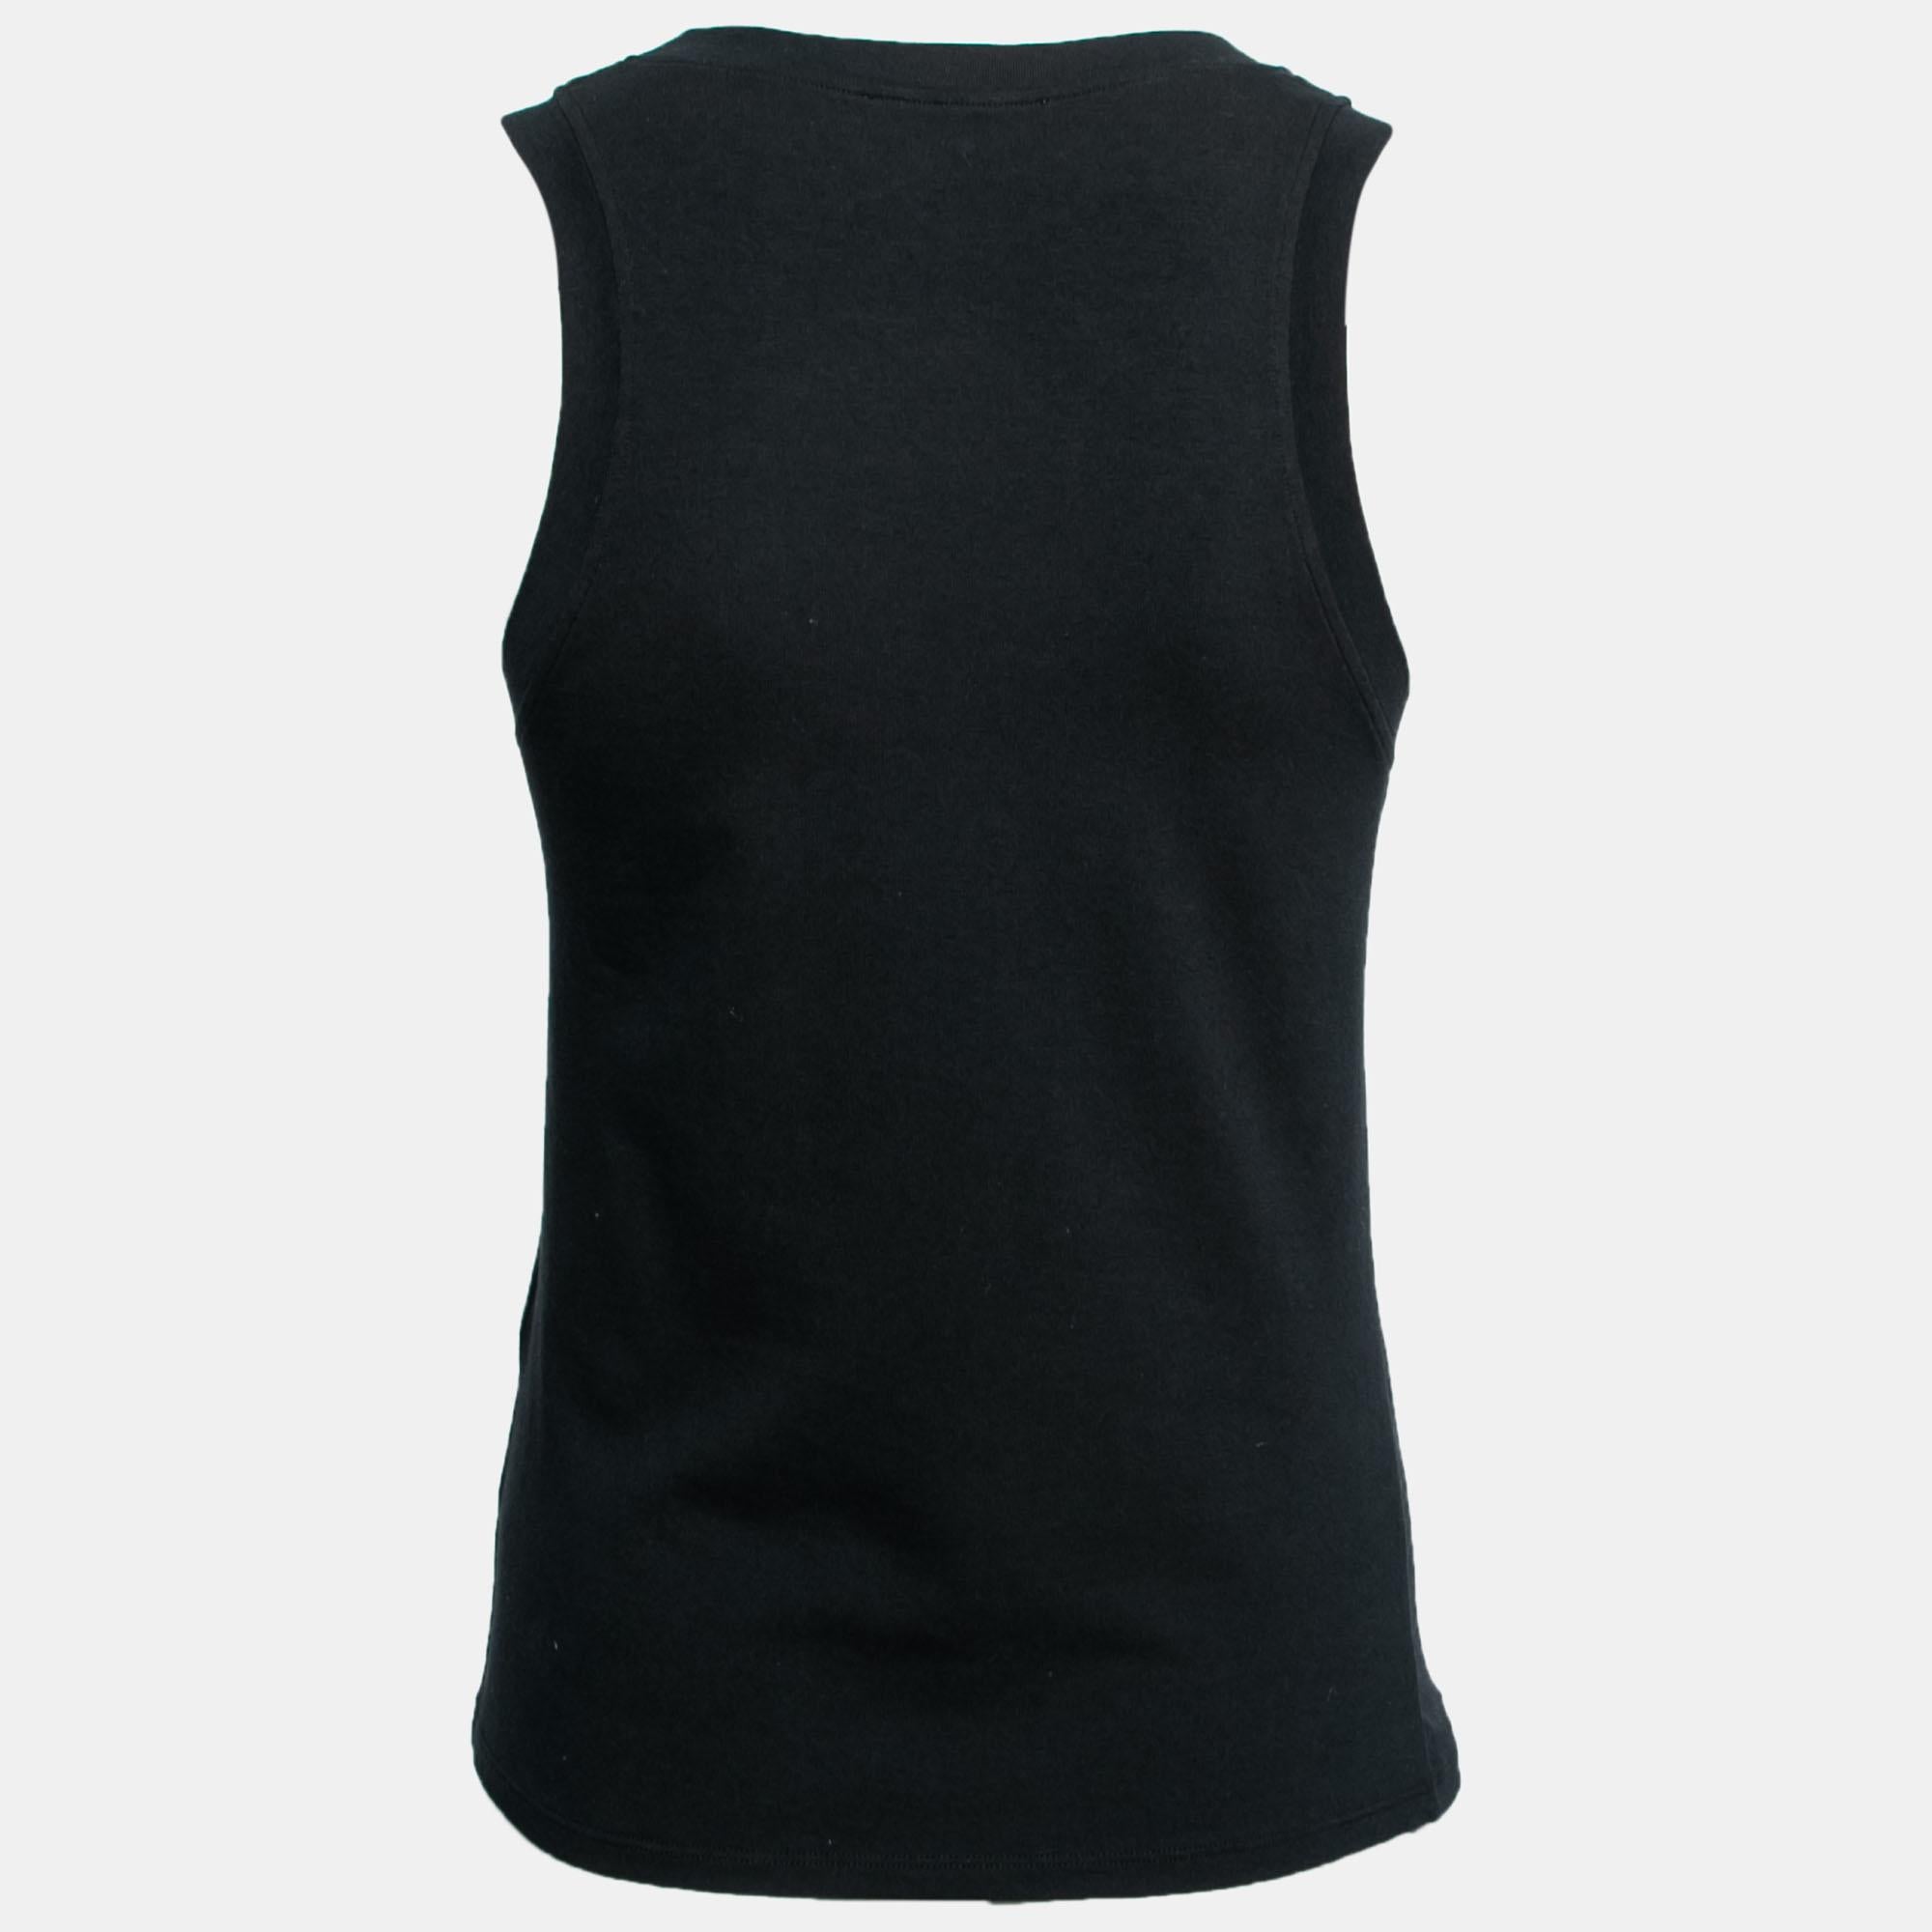 Update your basics with this tank top from the House of Roberto Cavalli. Simple and stylish, it is cut from black stretch-cotton fabric, with contrasting logo prints highlighting the front. This top will help you sport a comfy and casual style.

